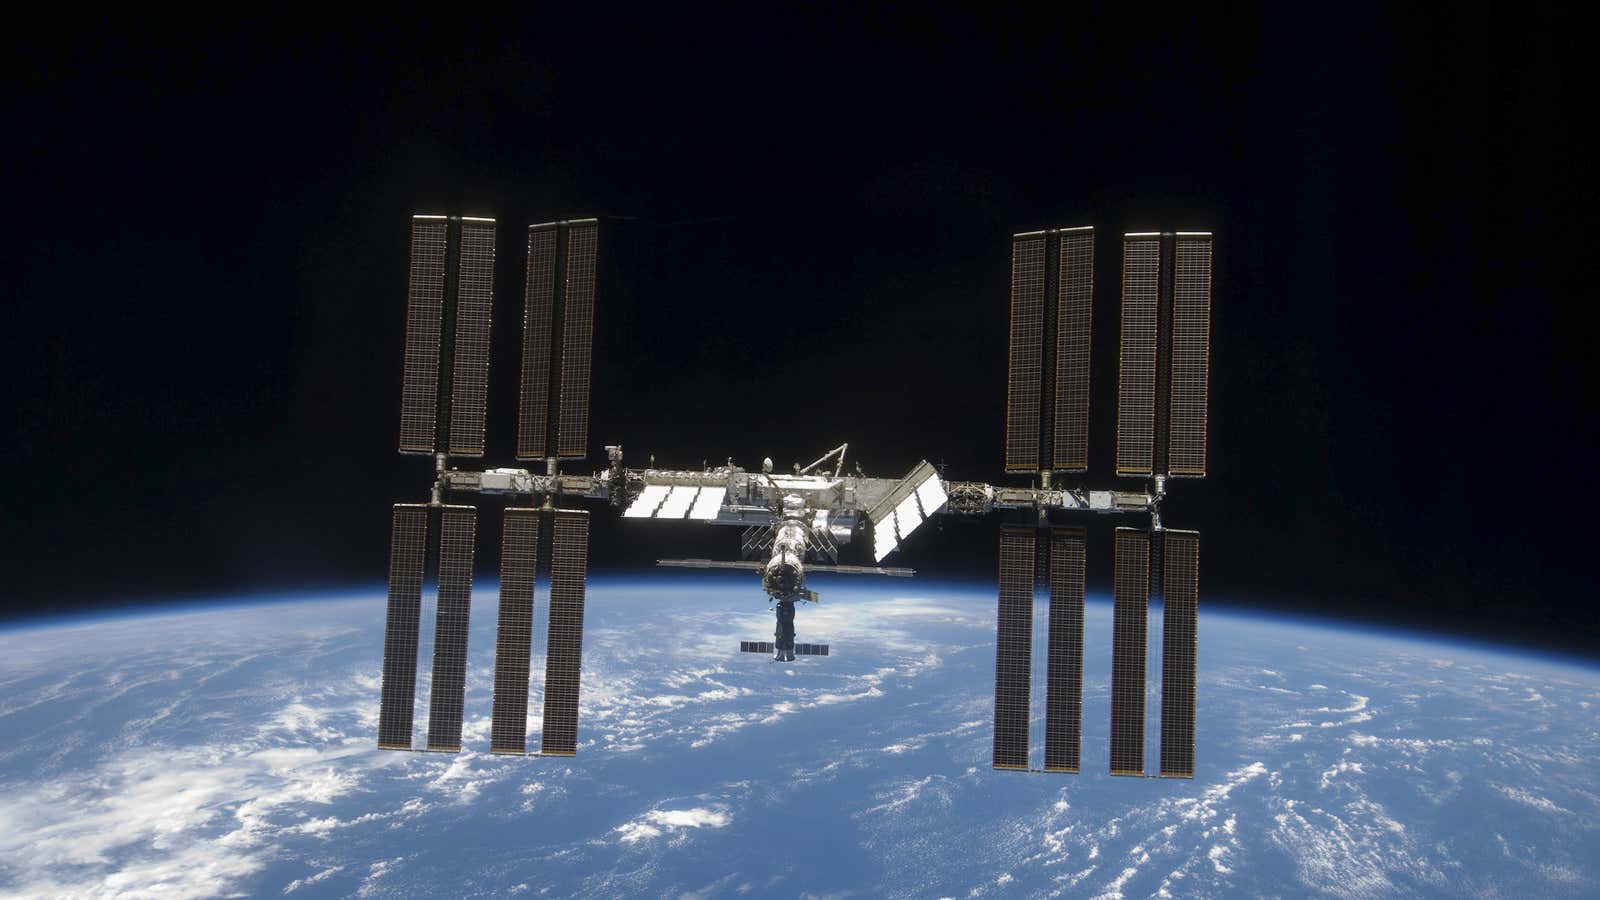 What would become of the International Space Station if there were weapons in orbit?